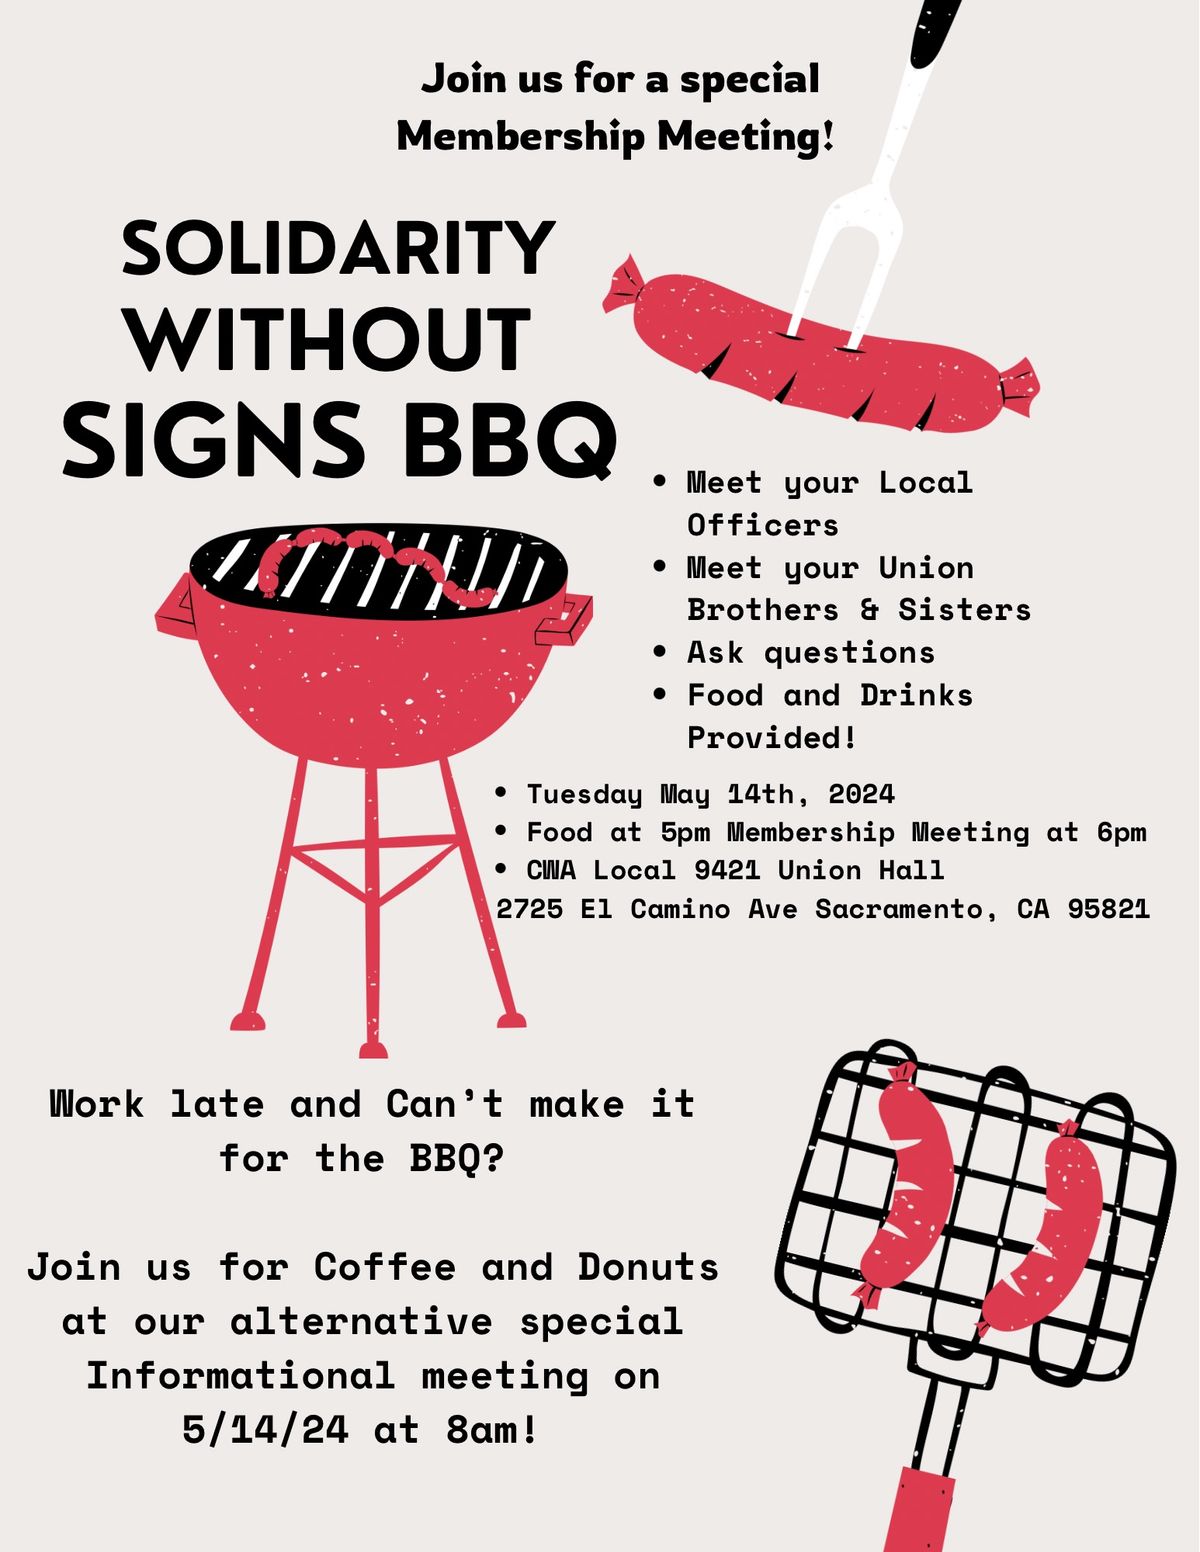 Solidarity Without Sign BBQ and Membership Meeting